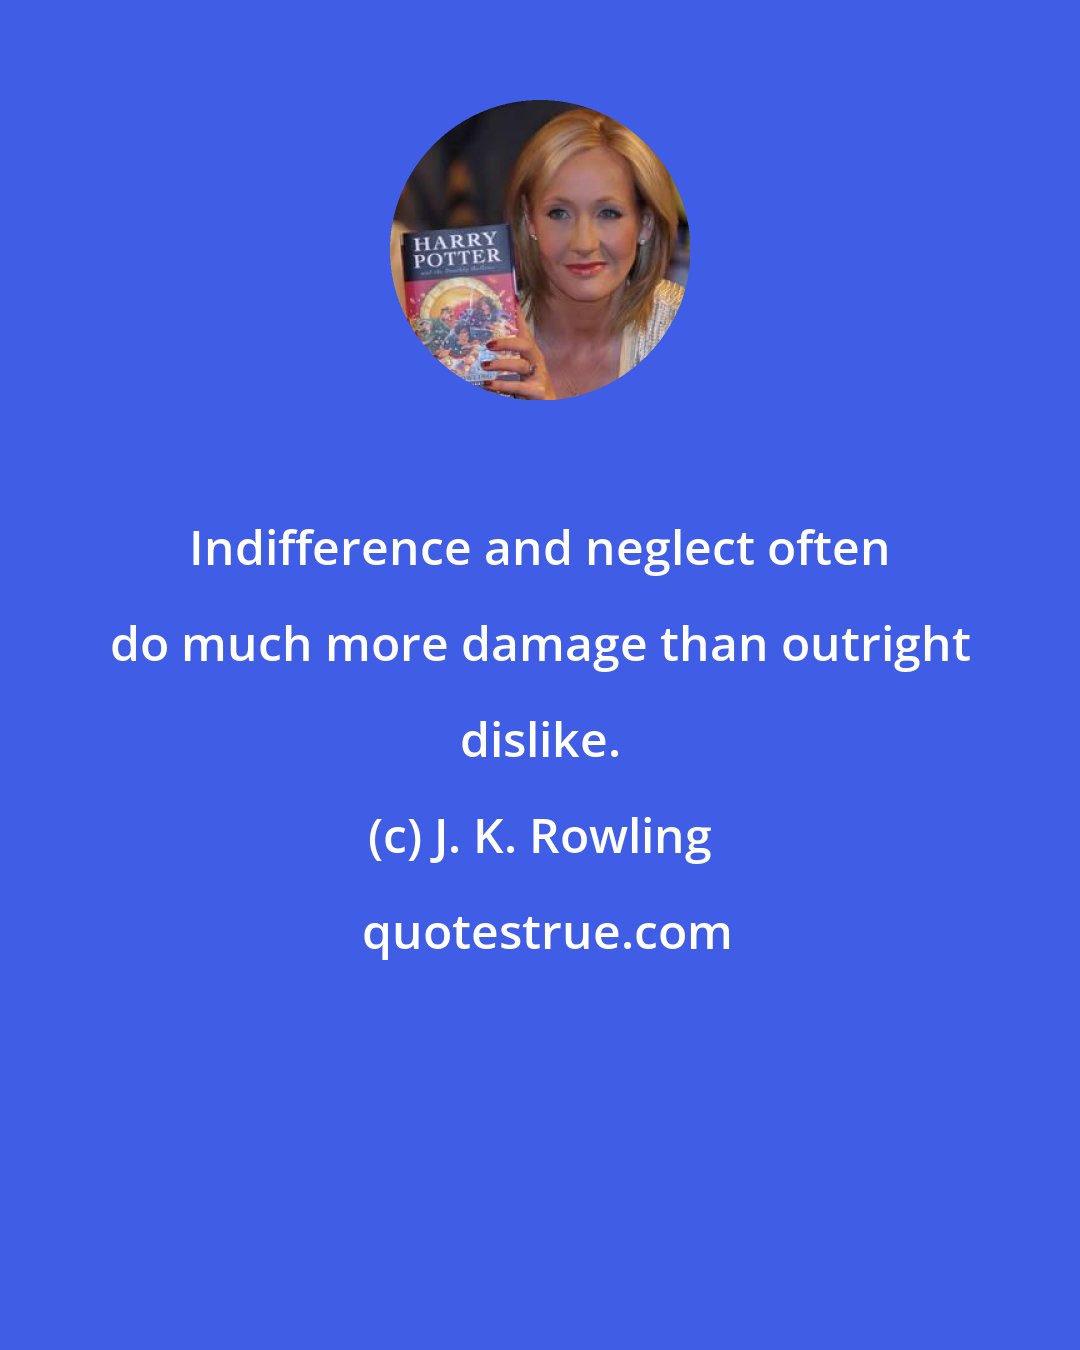 J. K. Rowling: Indifference and neglect often do much more damage than outright dislike.